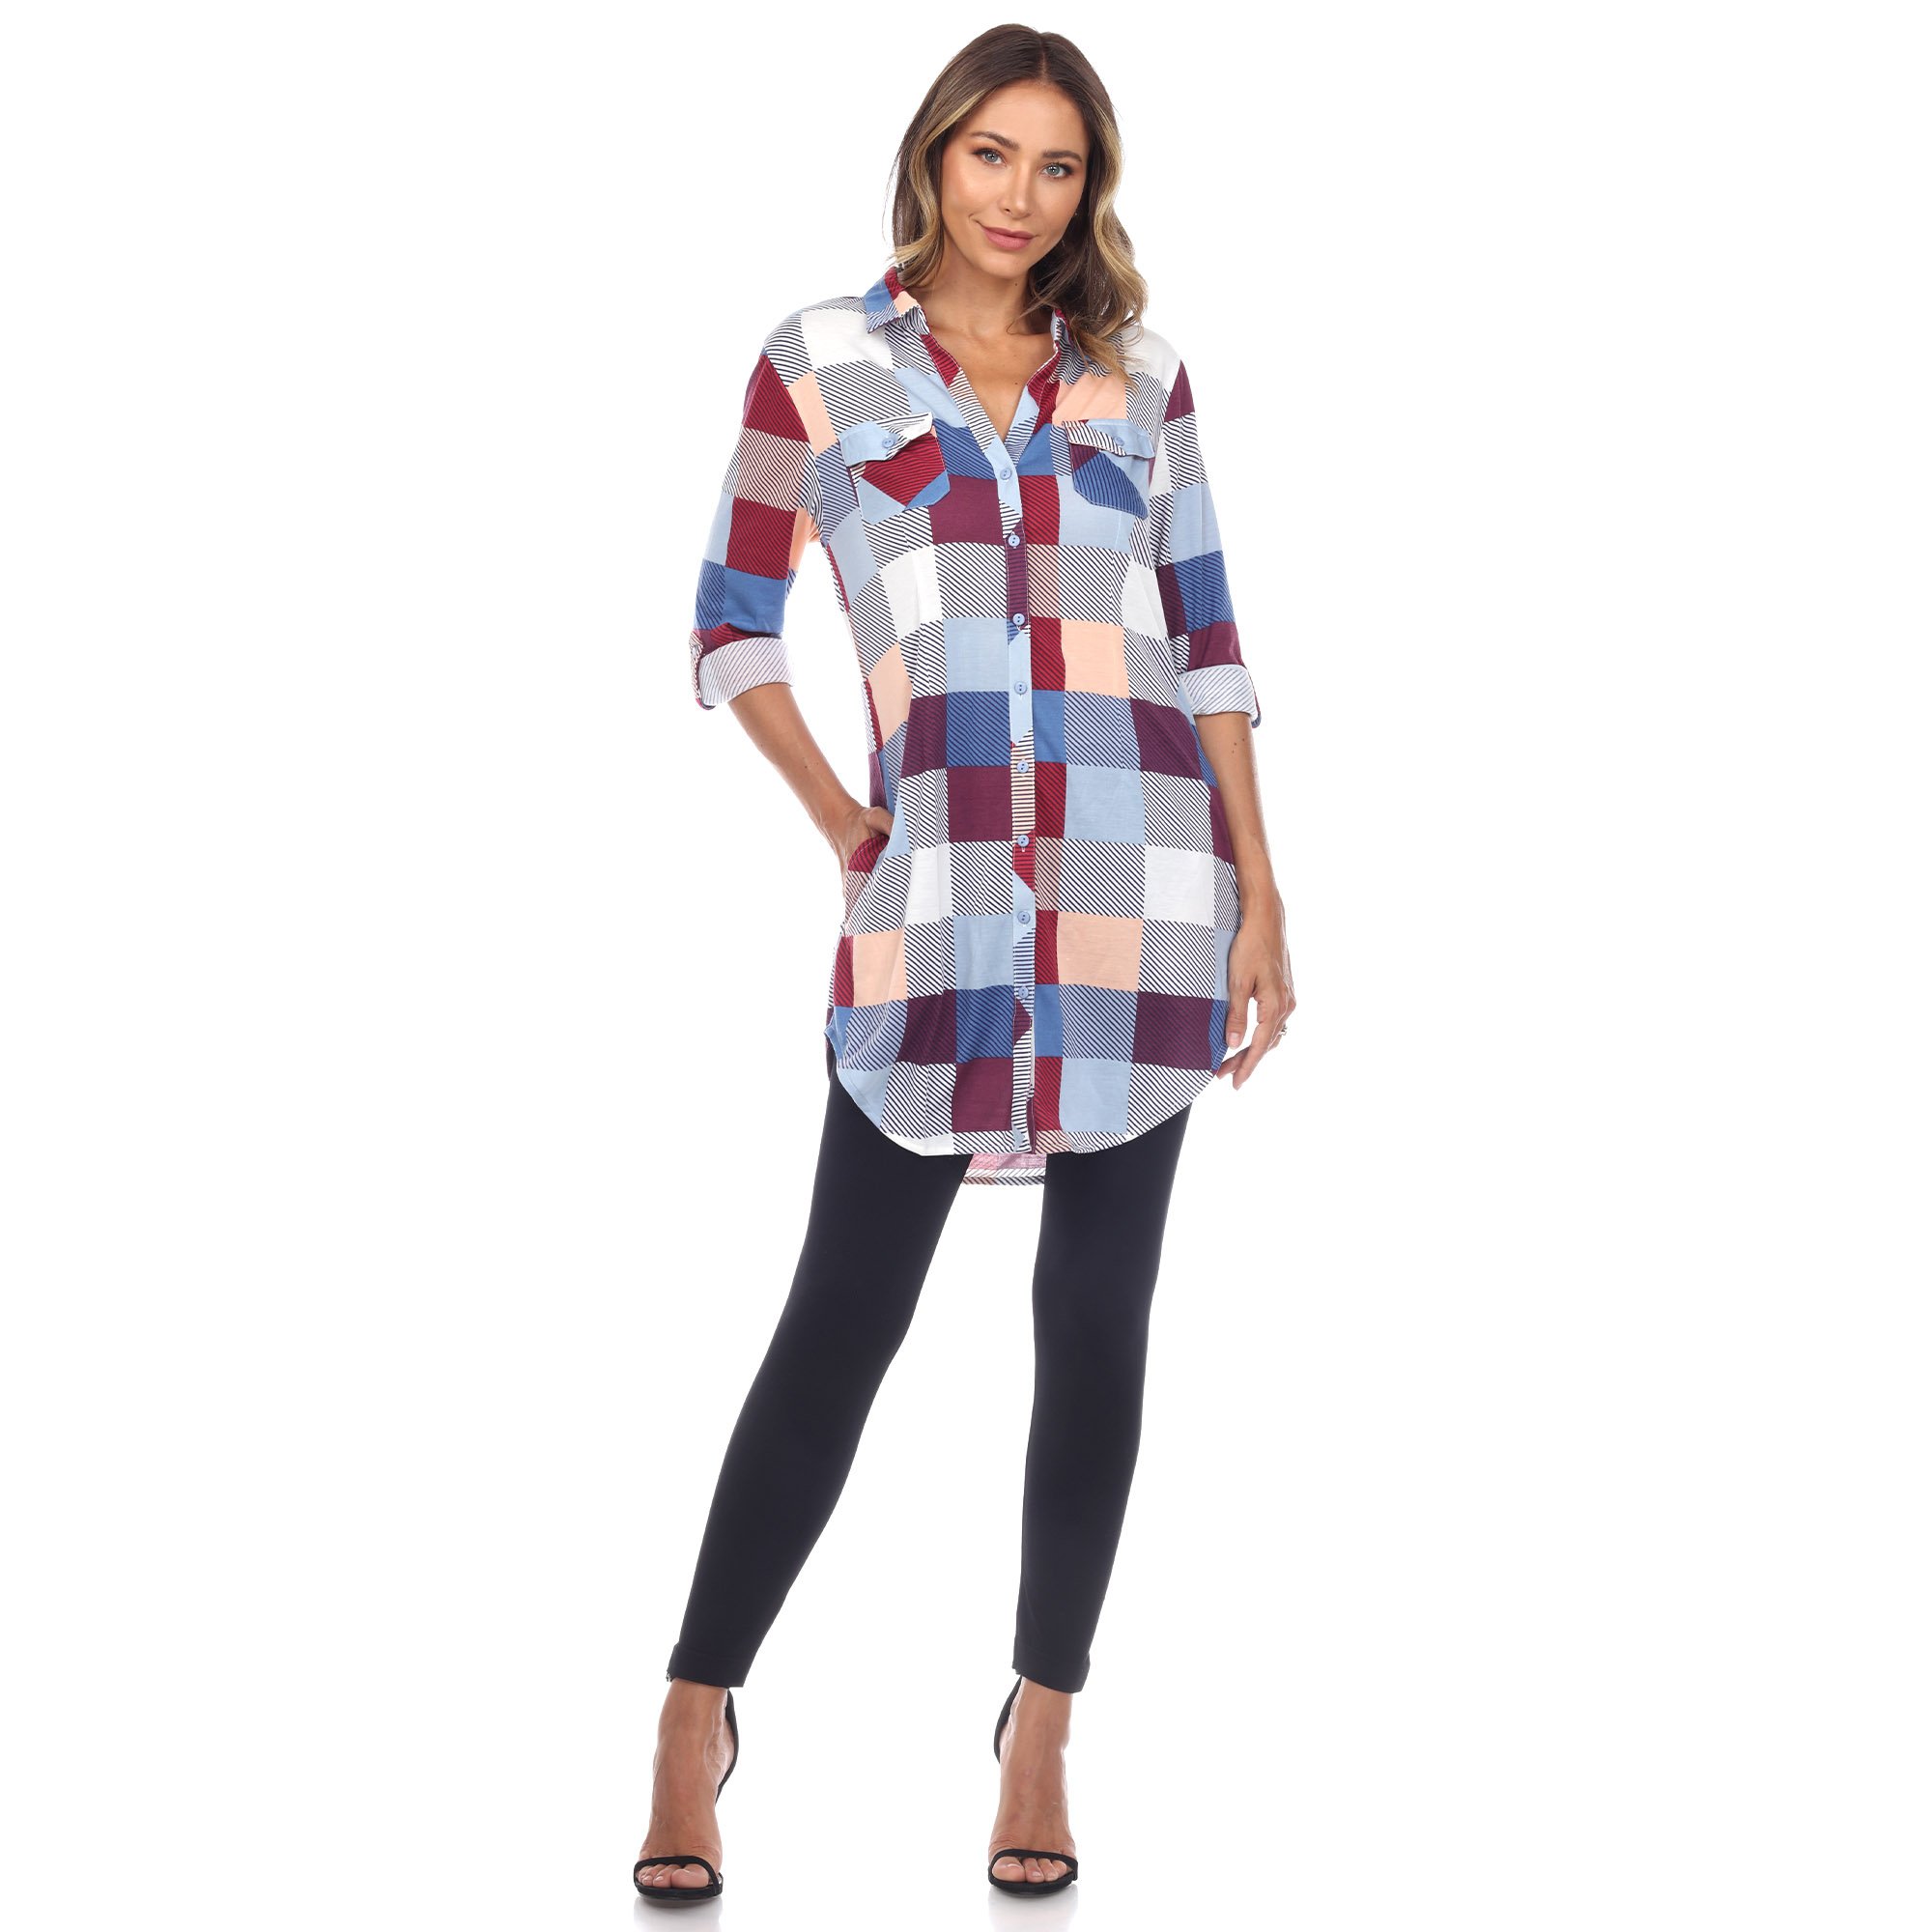 White Mark Women's Stretchy Buffalo Plaid Tunic Top - Red/Black, Small